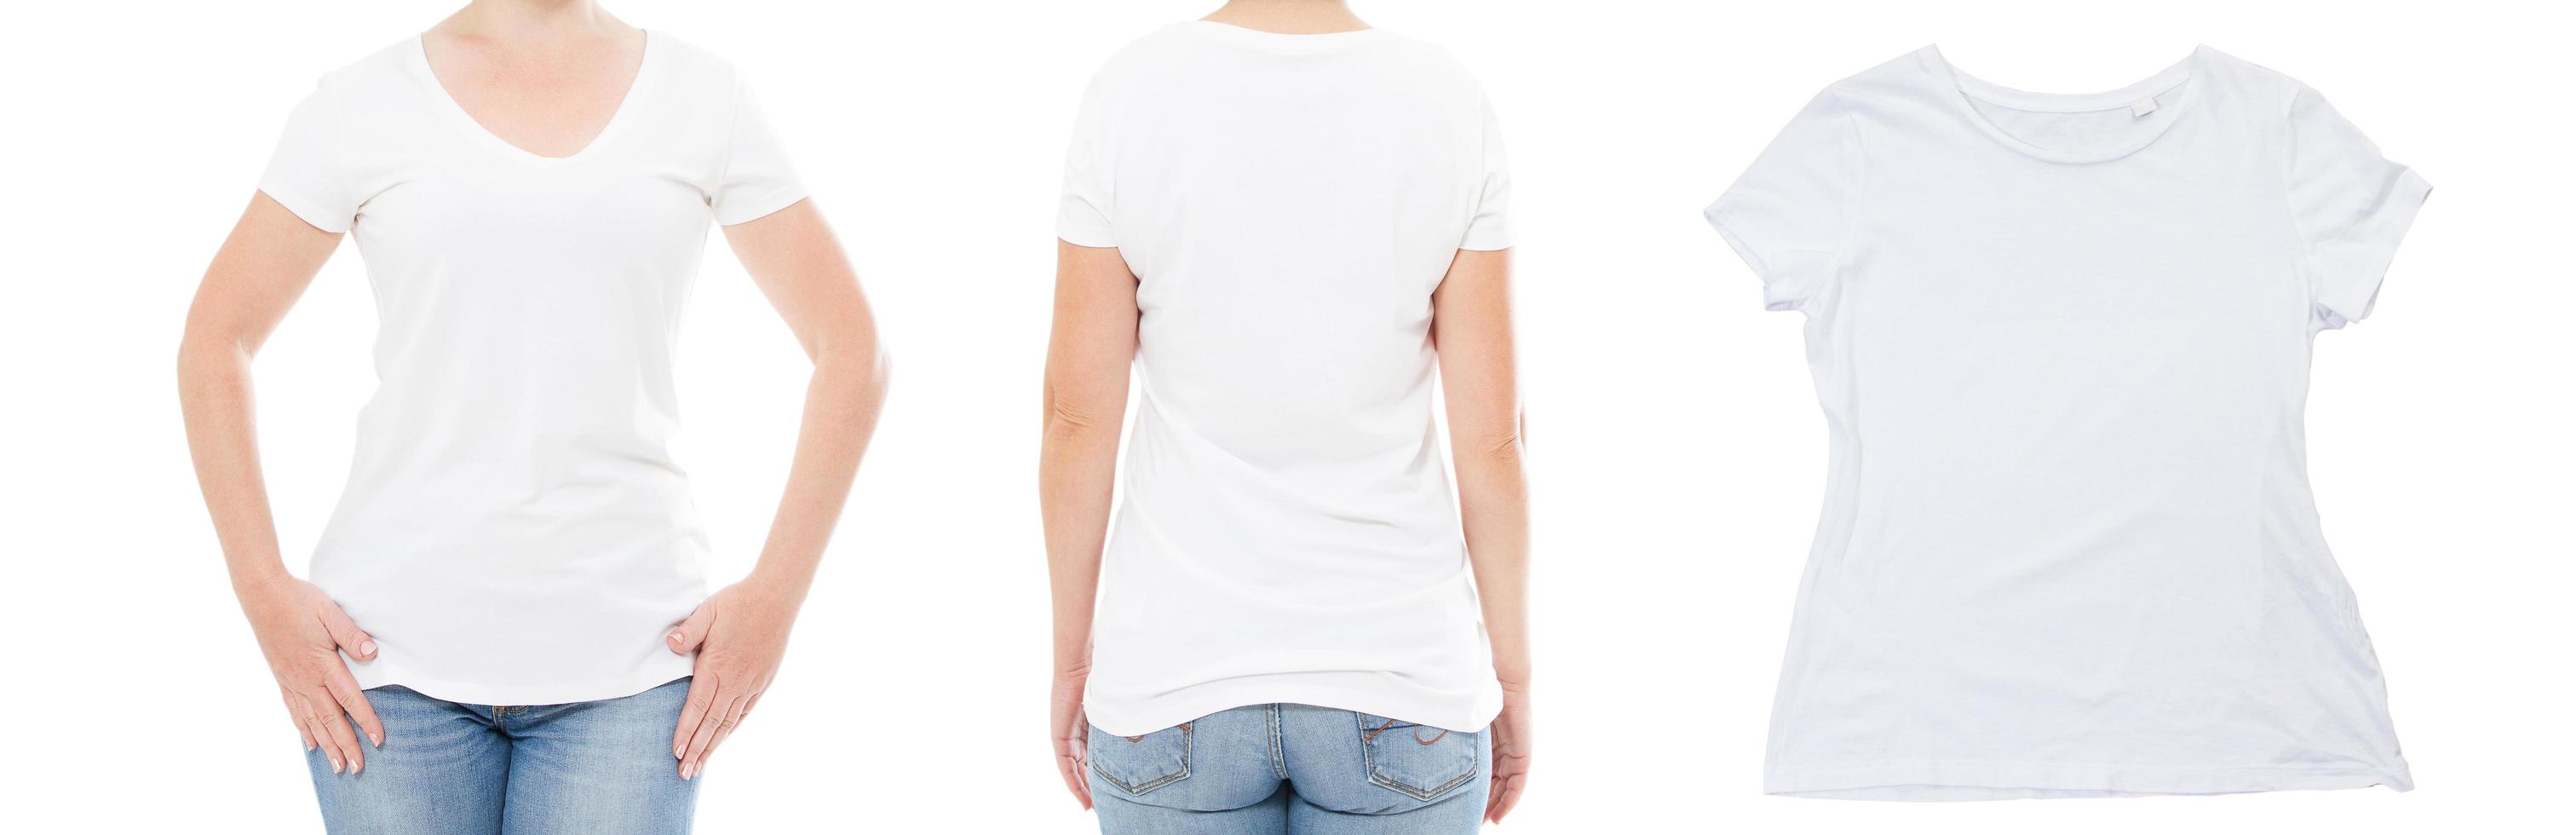 lady in t-shirt set - front and back view copy space, white empty T shirt close up background photo